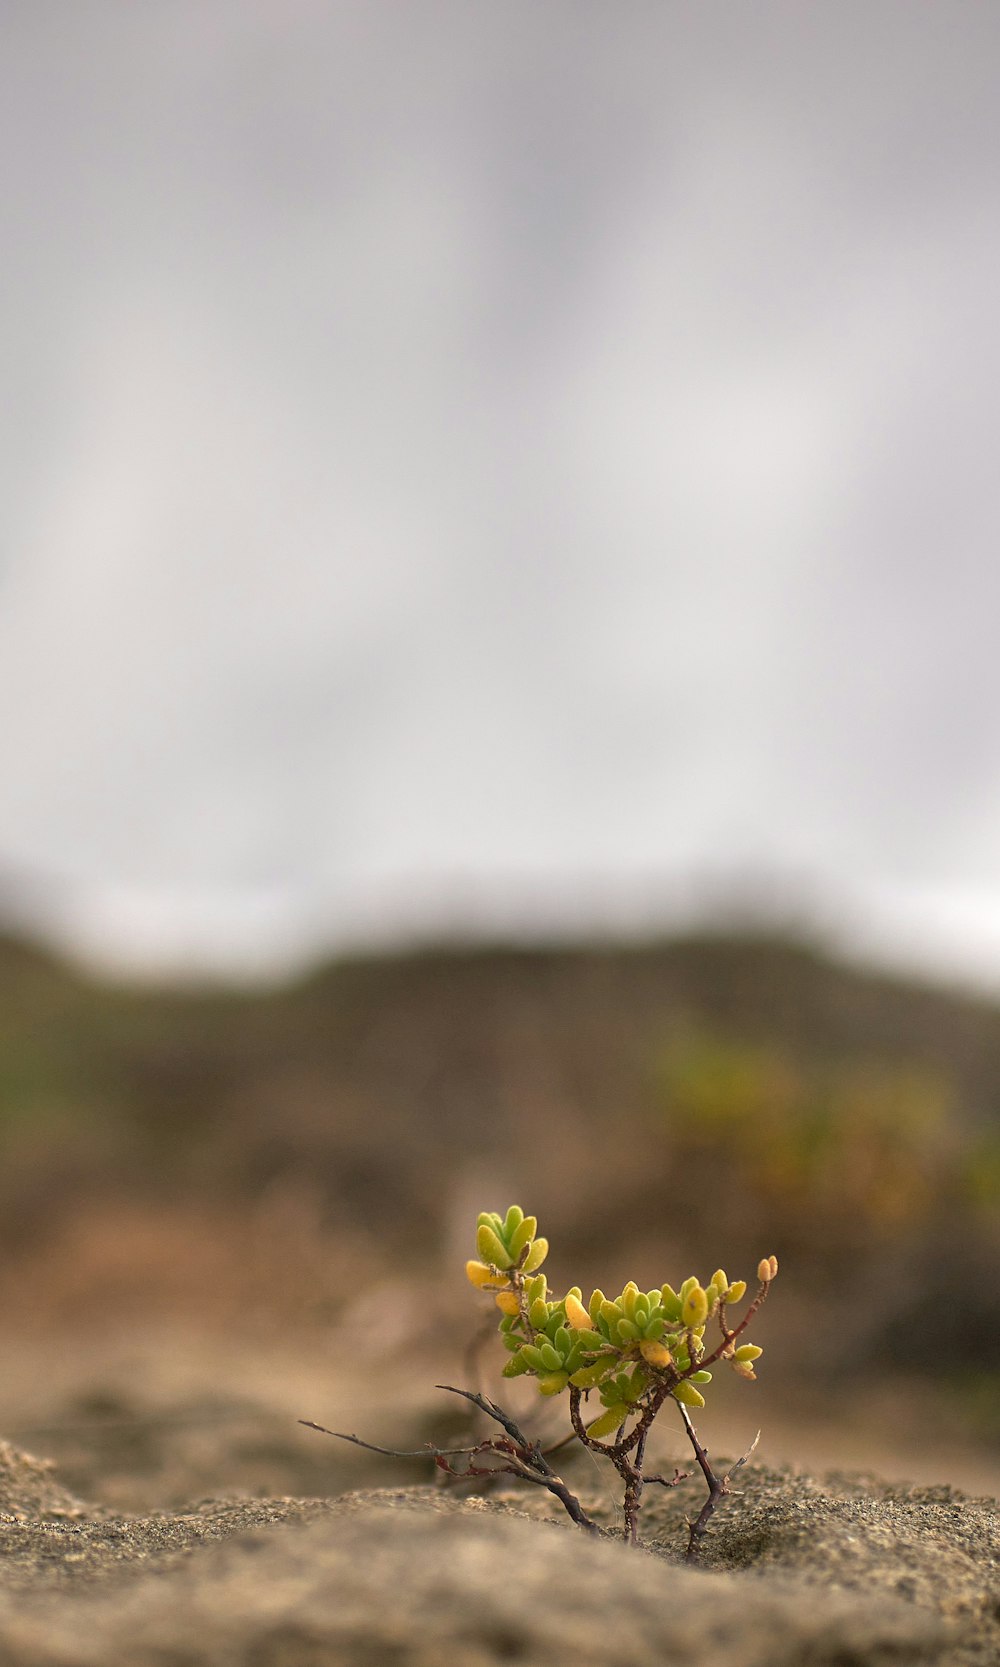 a small plant sprouts out of the sand